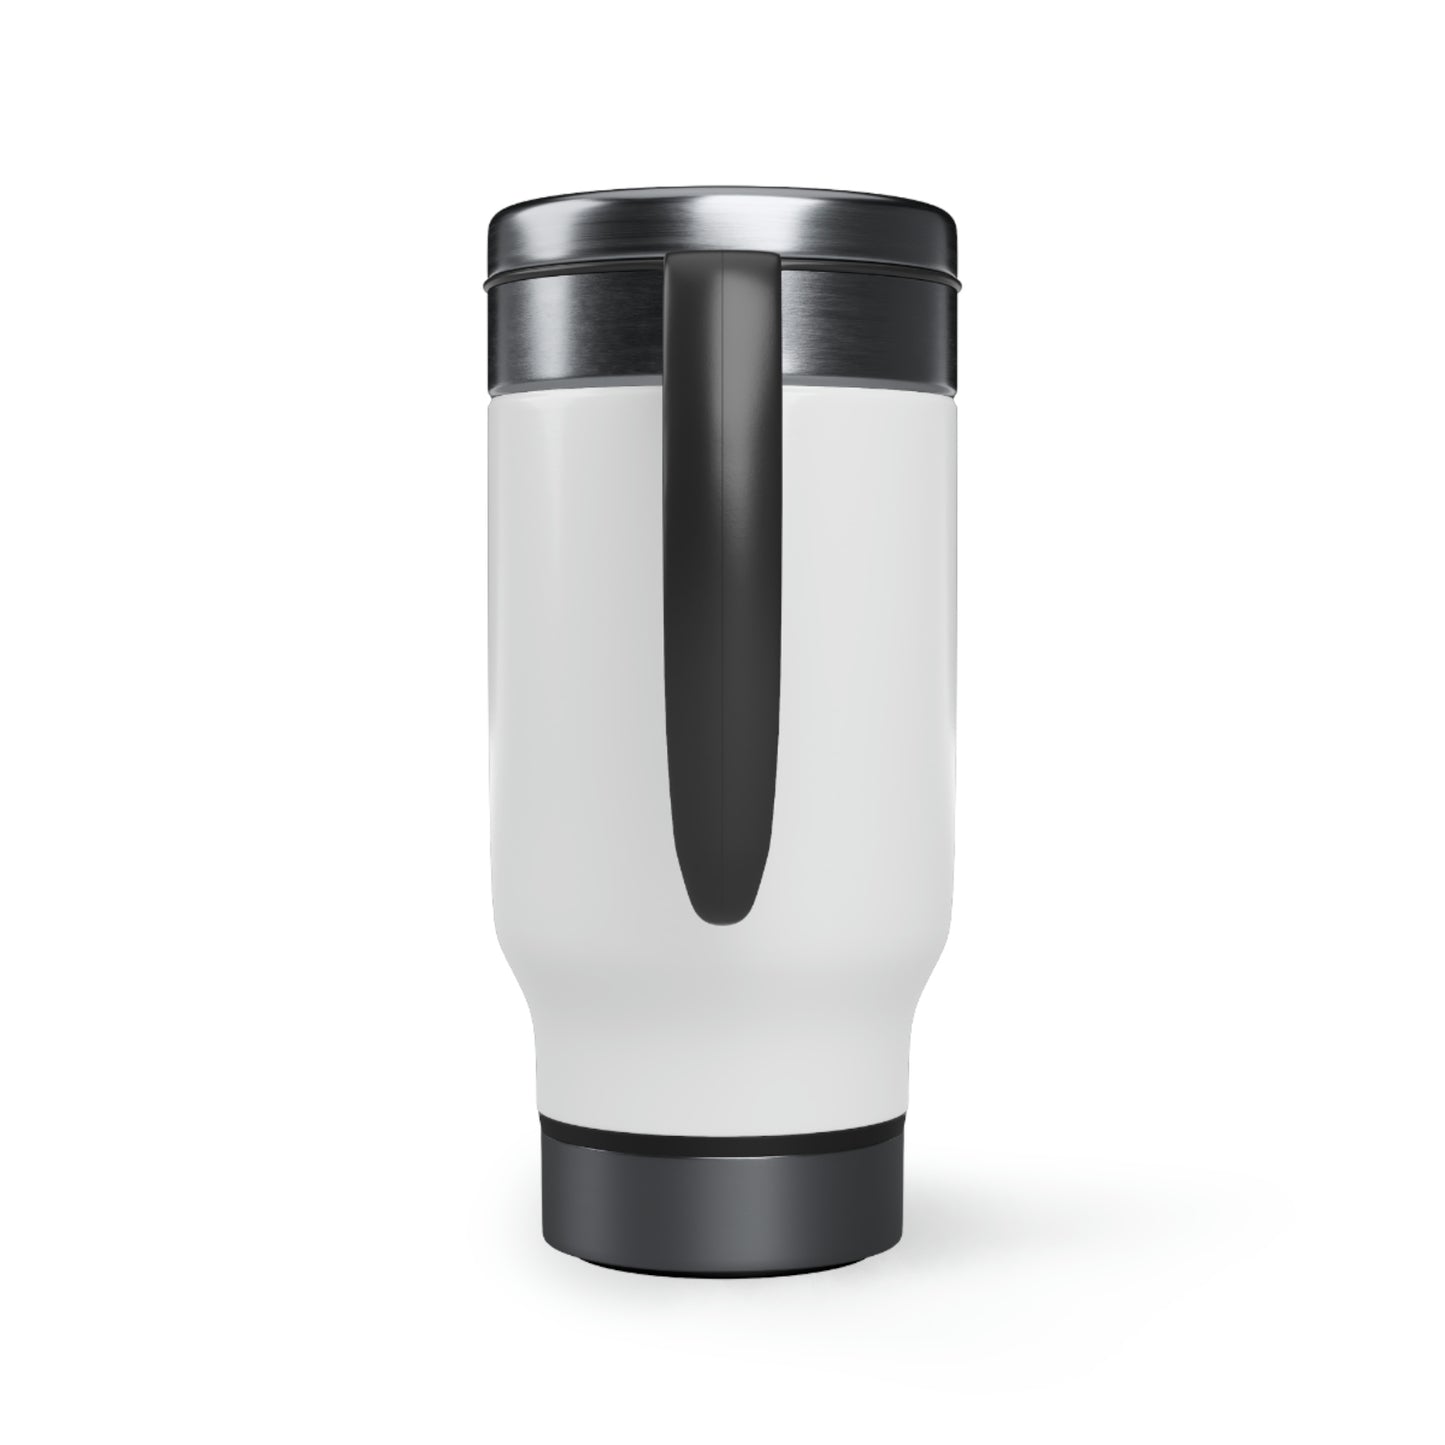 Branded Cowboy Stainless Steel Travel Mug with Handle, 14oz  #H10-02C